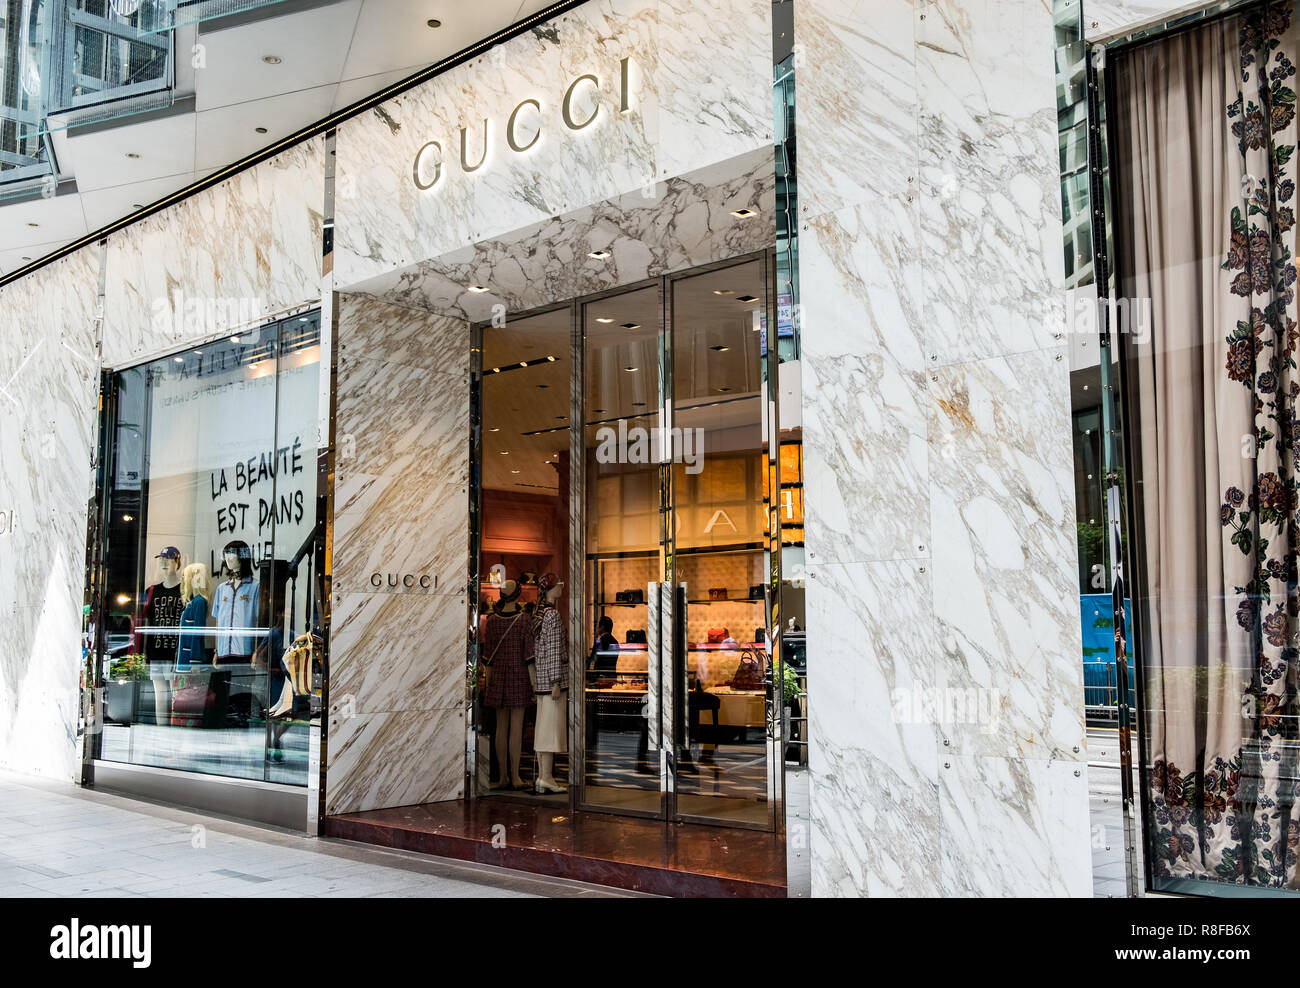 1,059 Gucci Store Window Images, Stock Photos, 3D objects, & Vectors